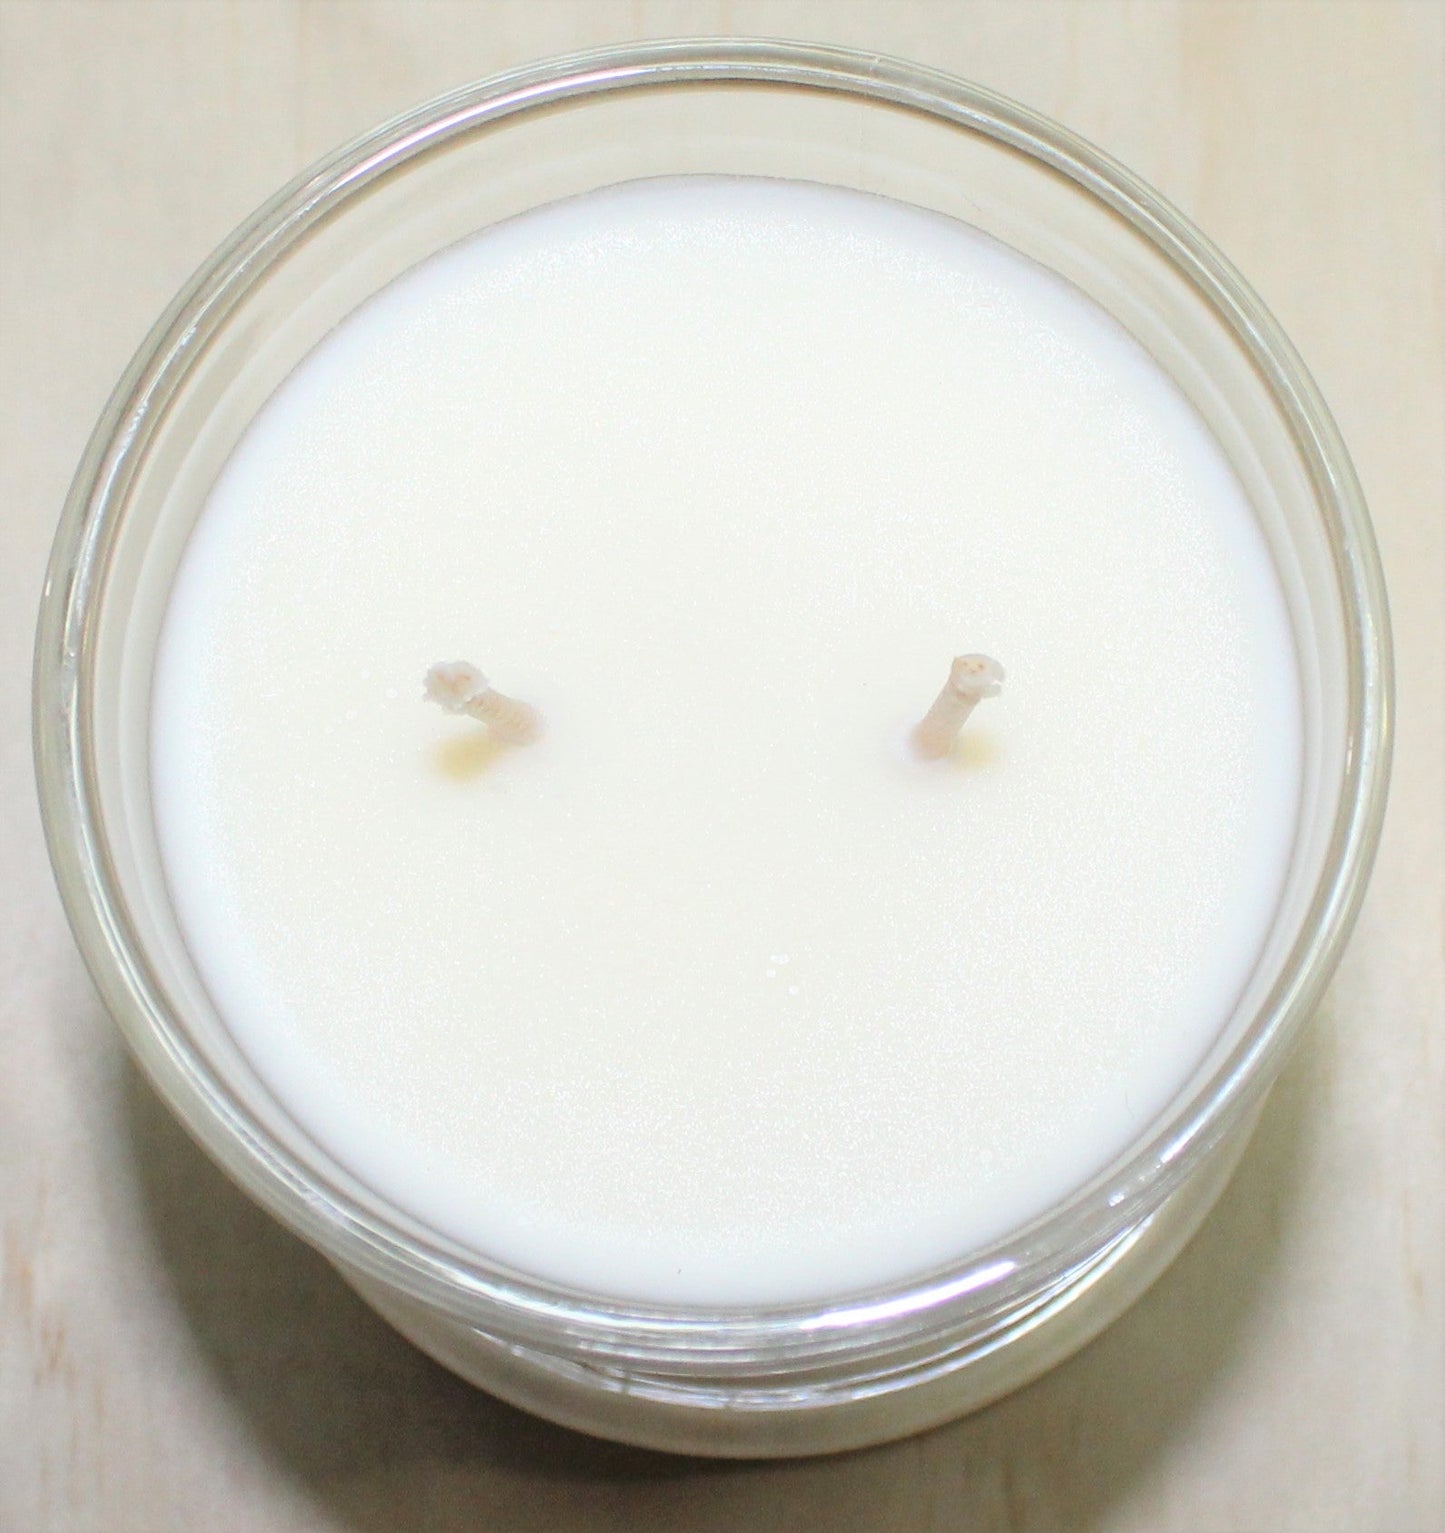 Vanilla Cove Soy Candle 50 hour Coffee Fragrance in clear glass jar image shows the two wicks